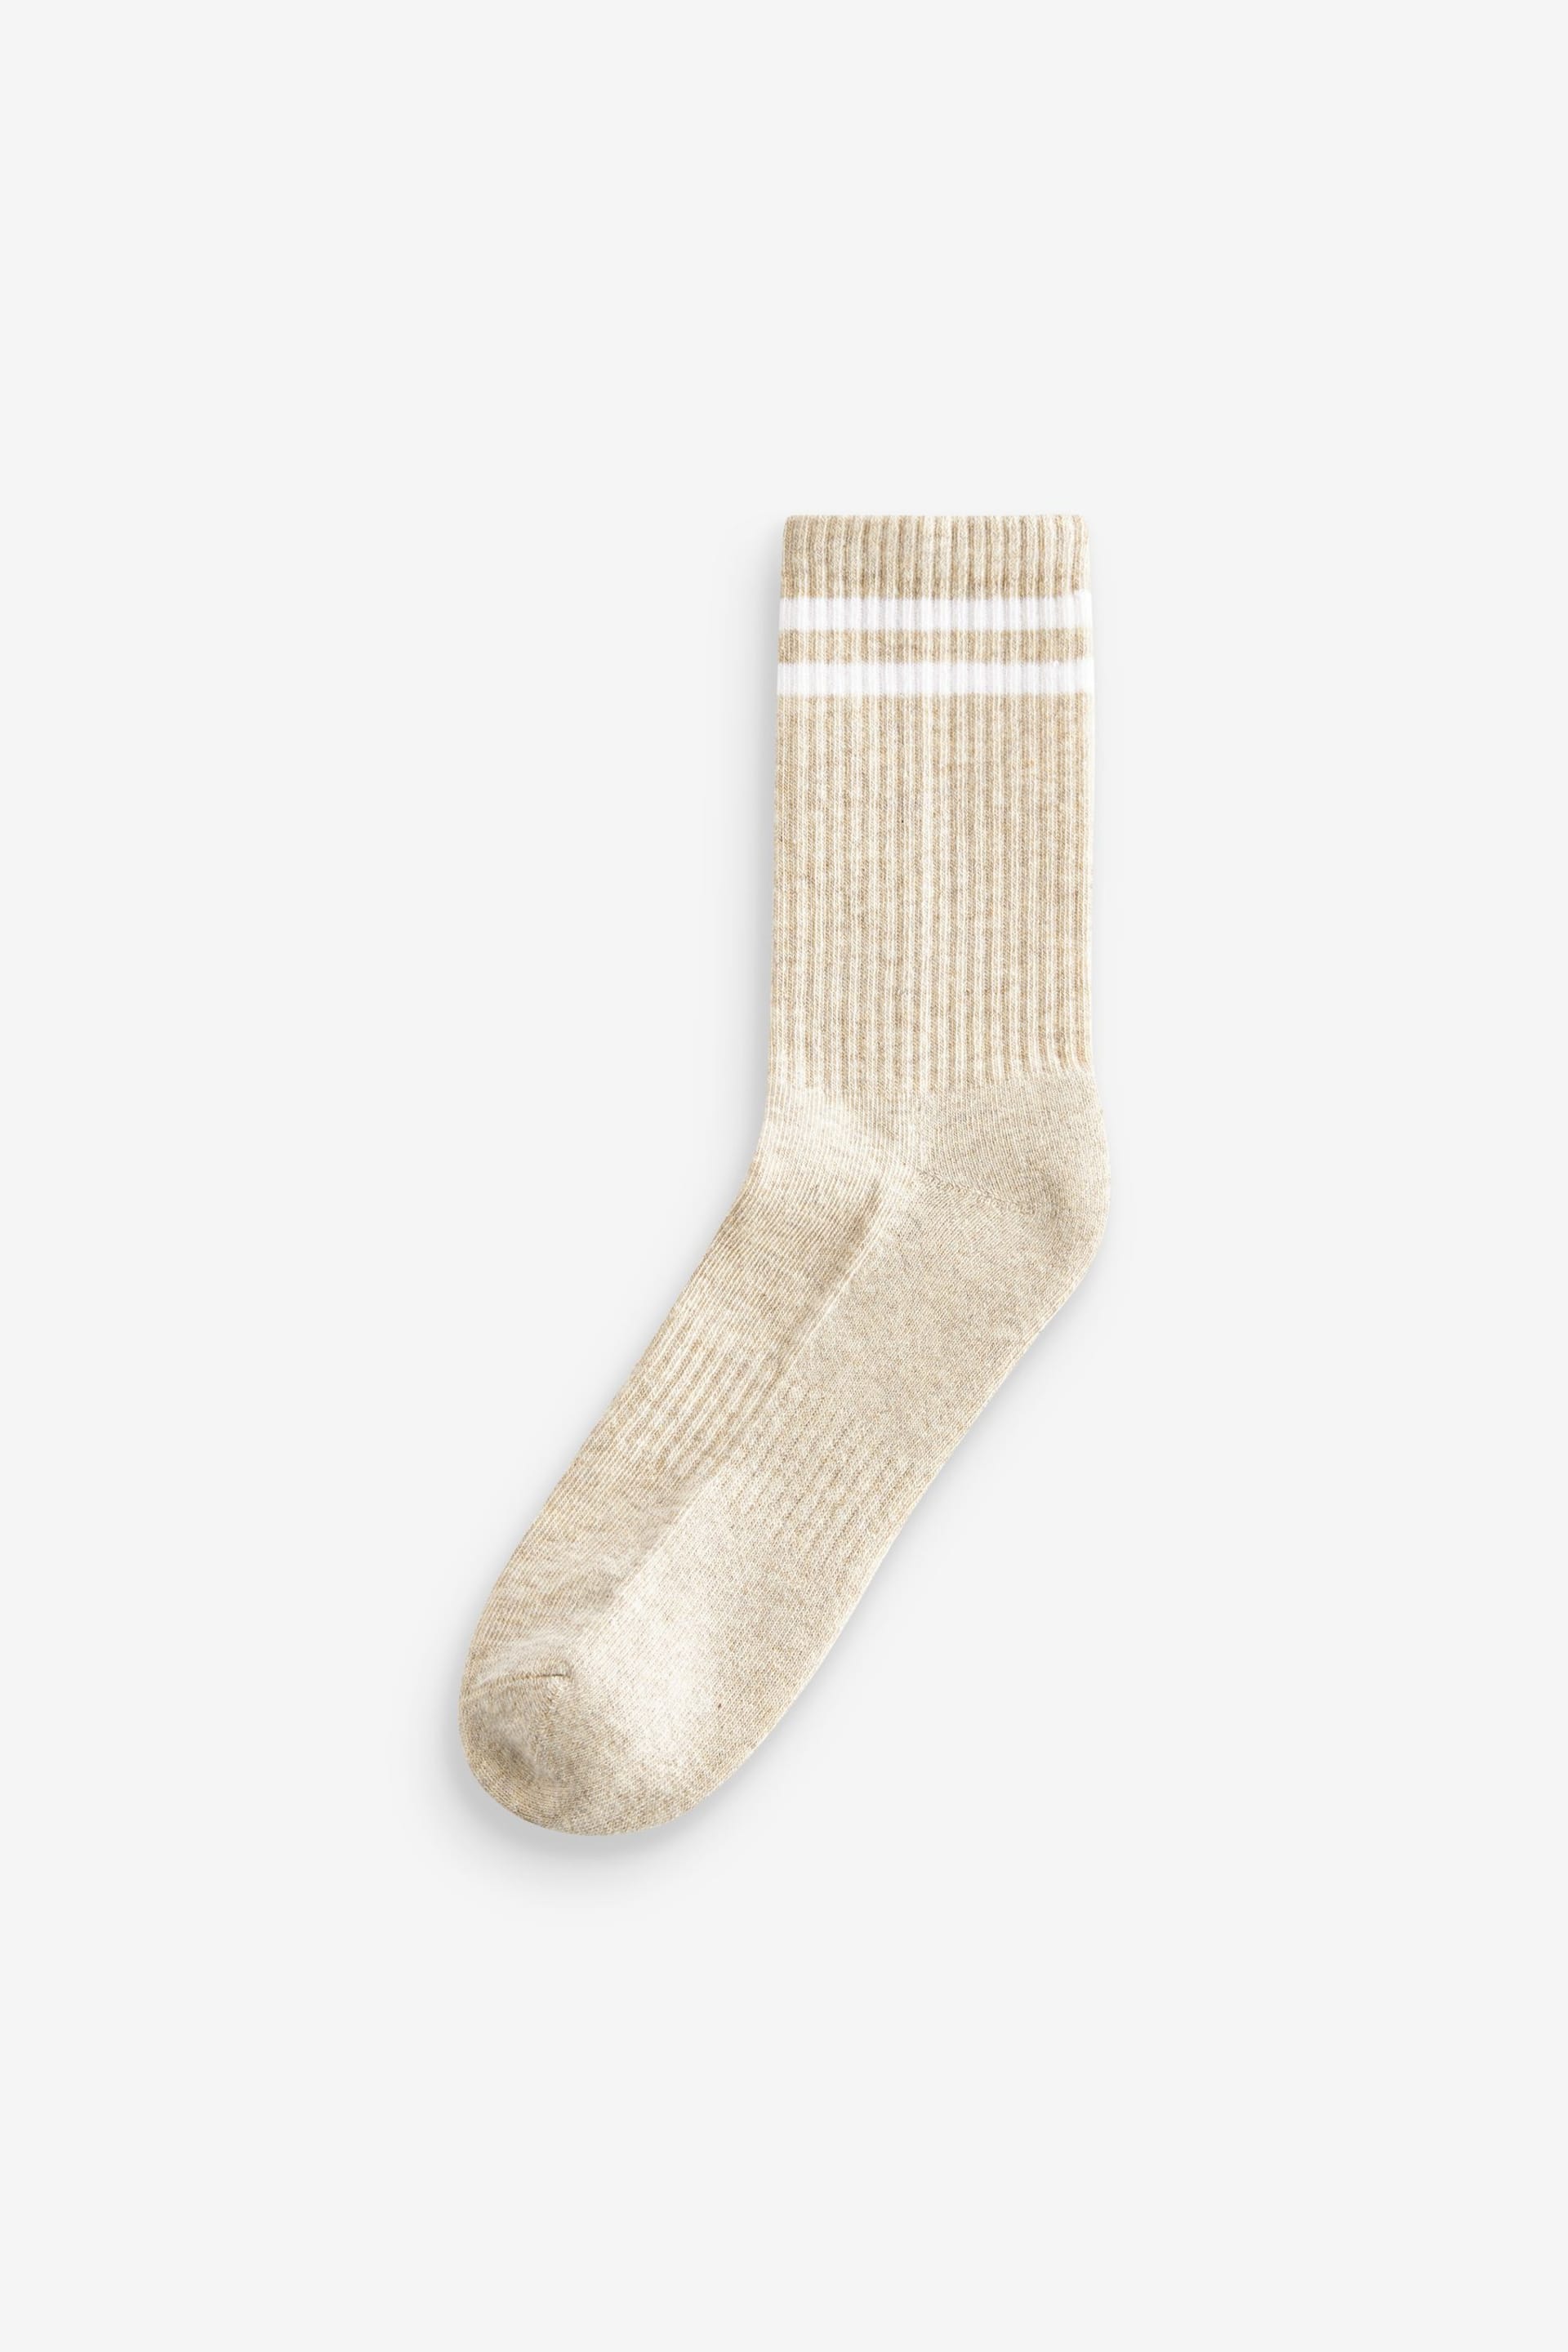 Neutral/White Stripe Cushion Sole Ribbed Sport Ankle Socks 3 Pack With Arch Support - Image 4 of 4